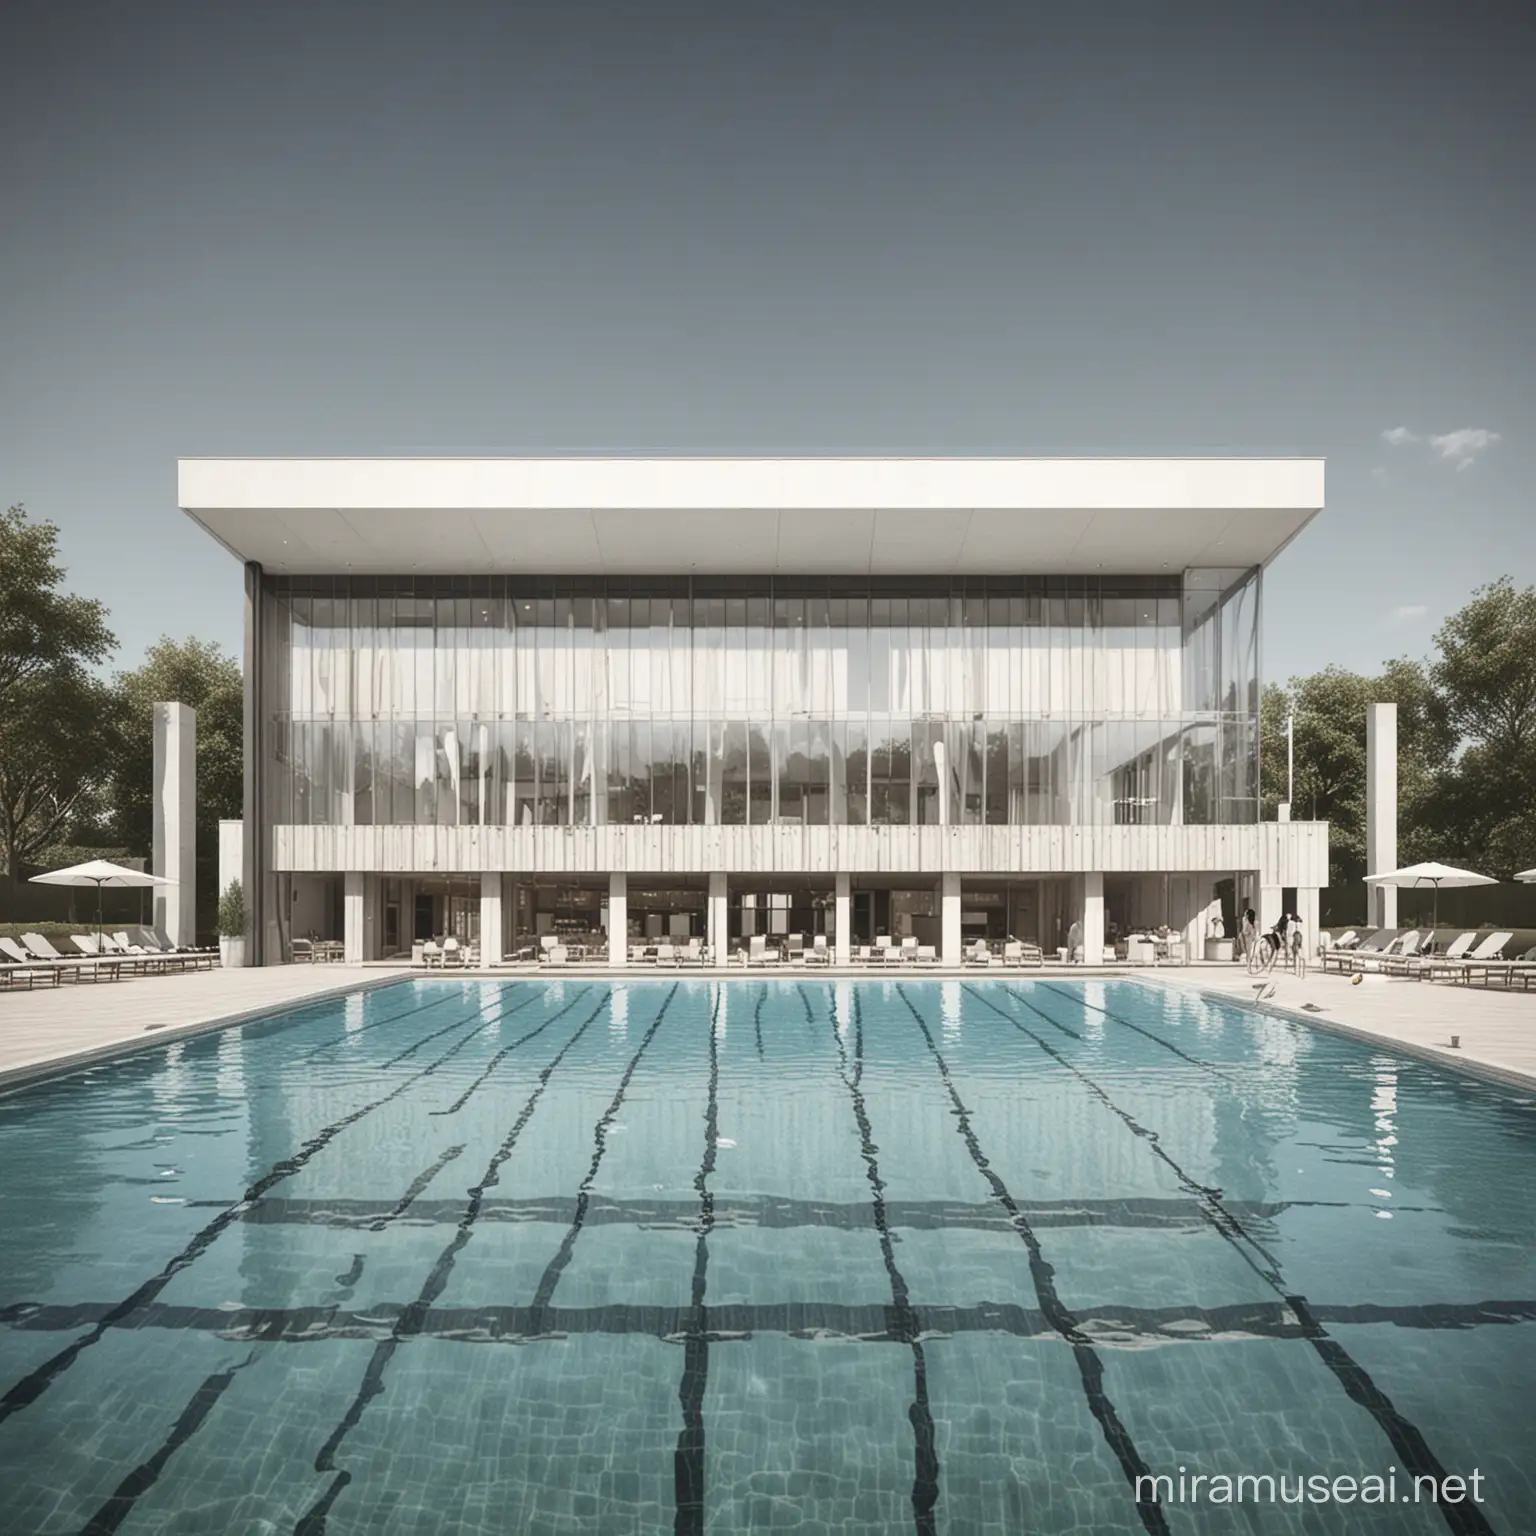 Recreational Swimming Pool Building with Integrated Dining and Retail Spaces